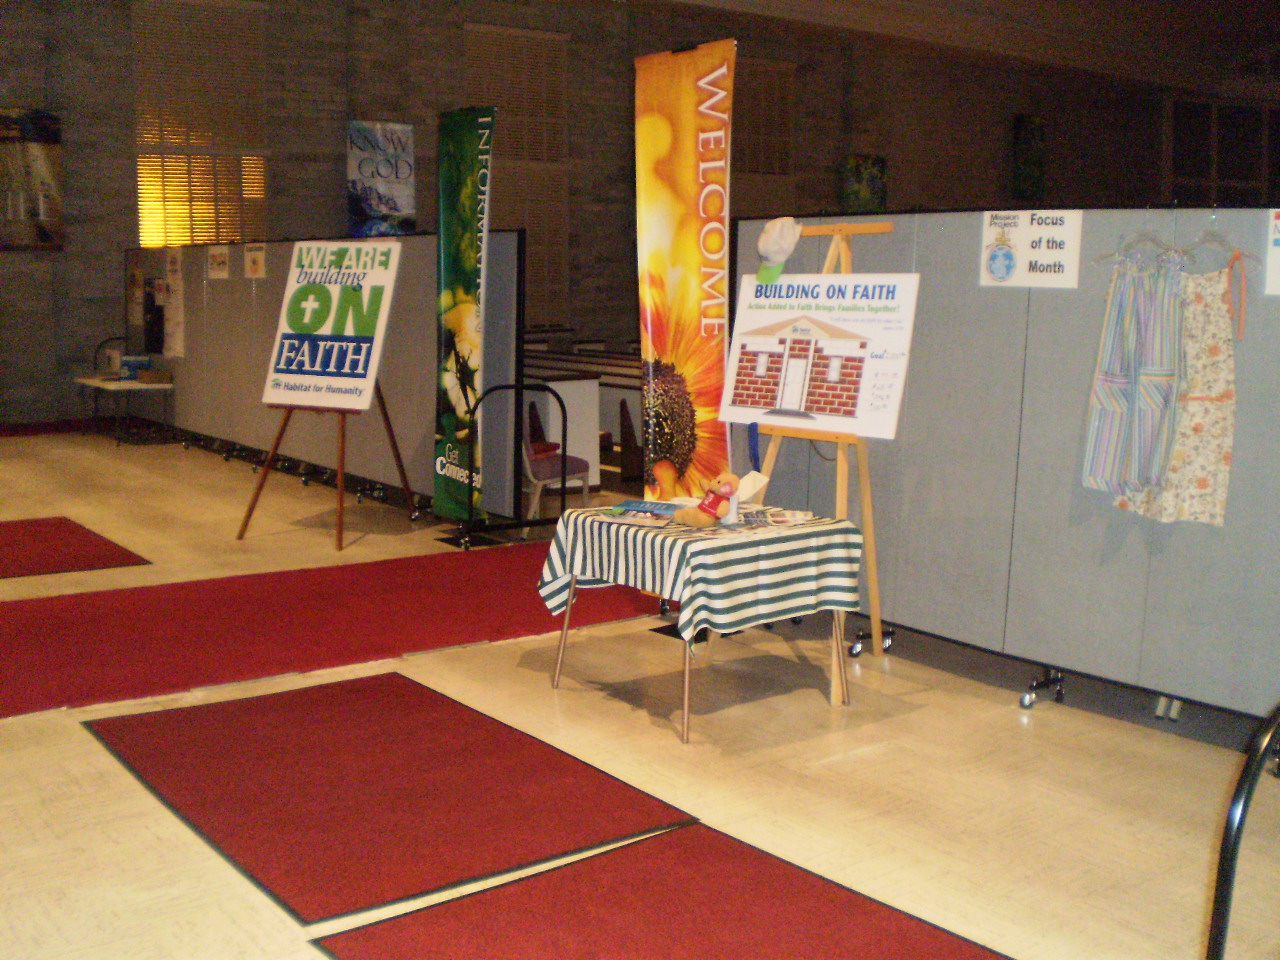 Church flyers and information are displayed on and around room dividers near the rear of a church